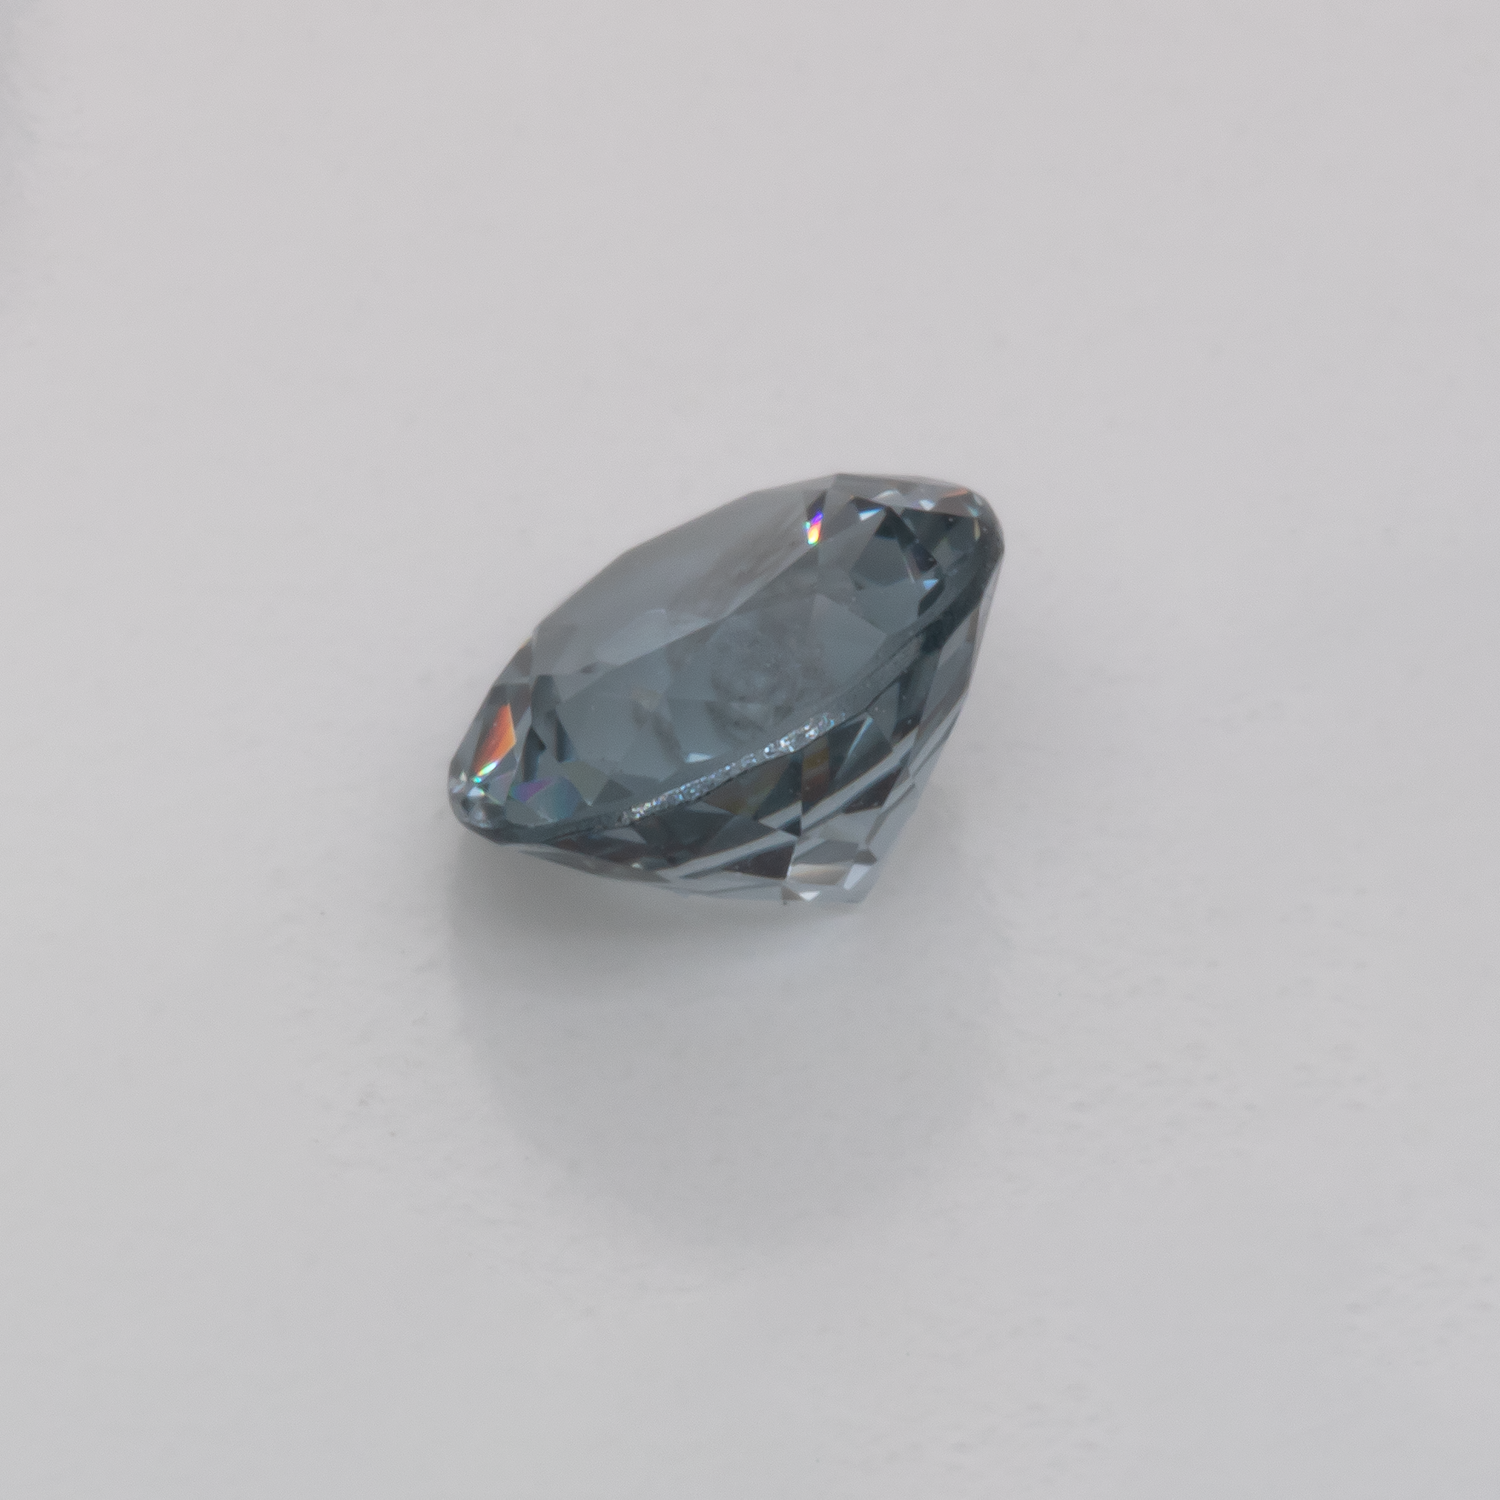 Spinel - blue/grey, round, 5.1x5.1 mm, 0.57 cts, No. SP90012